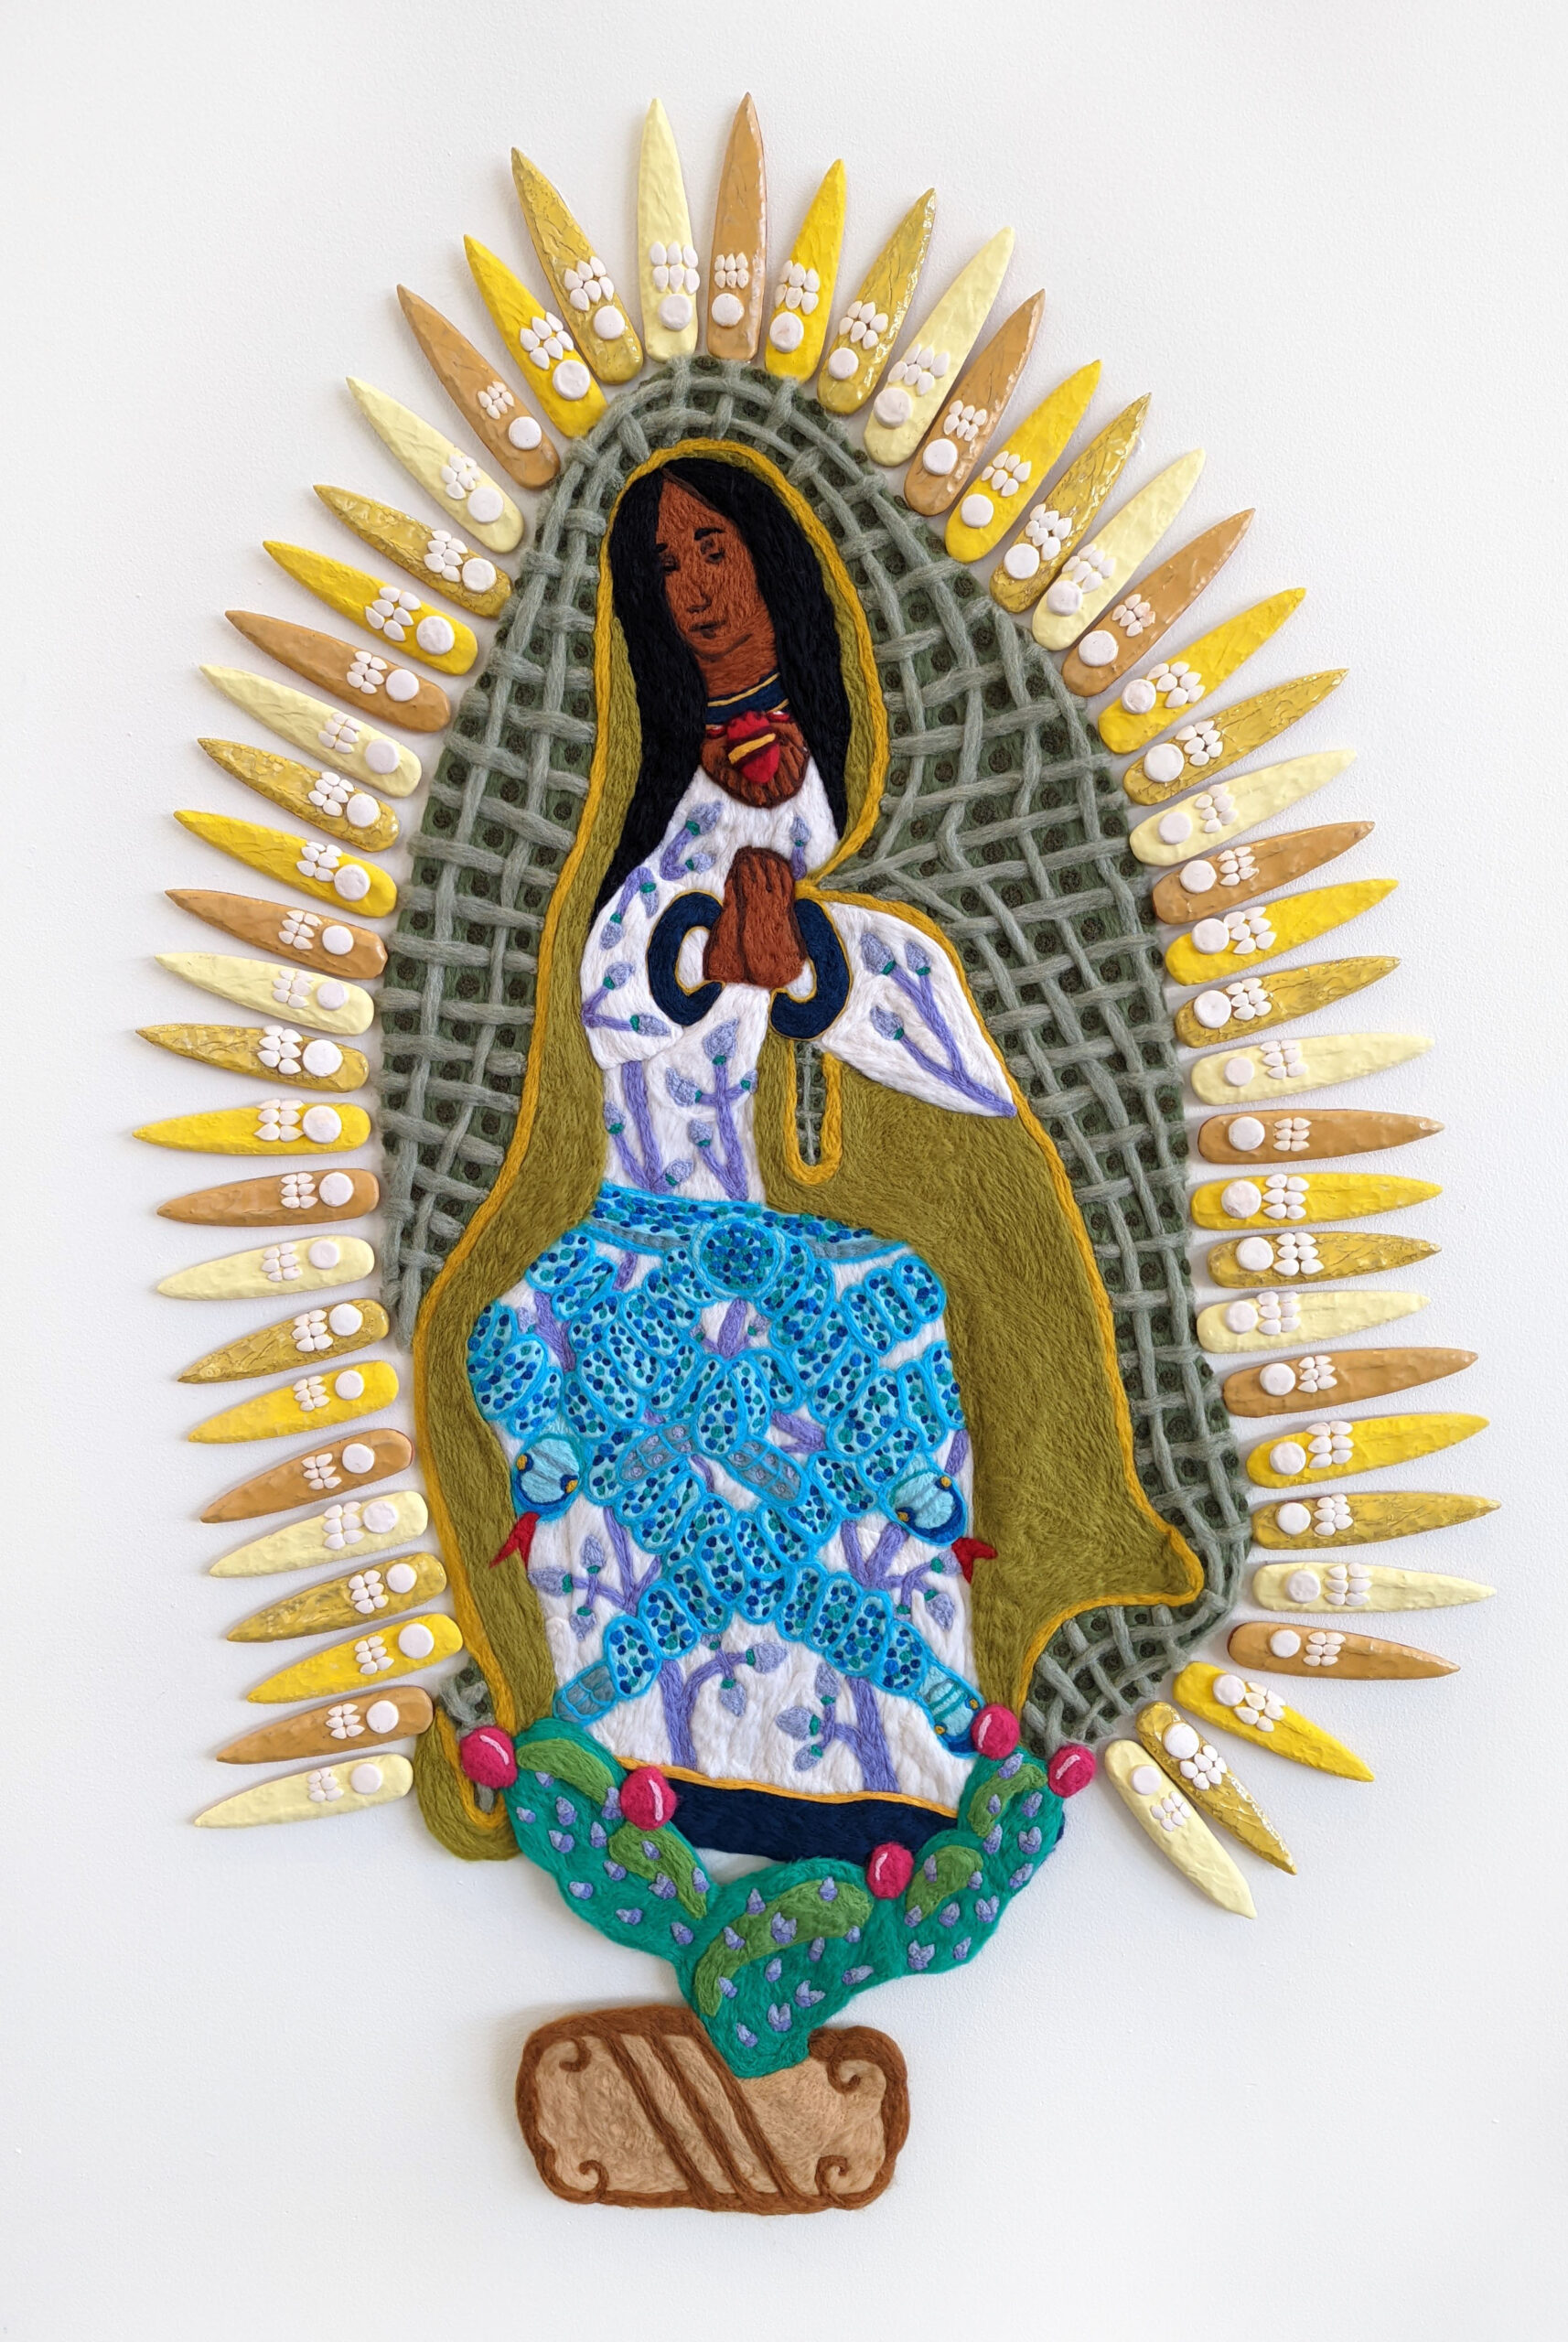 A felted sculpture of the Mexica goddess Coatlicue represented as the Virgin Mary, surrounded by ceramic macuahuitl.